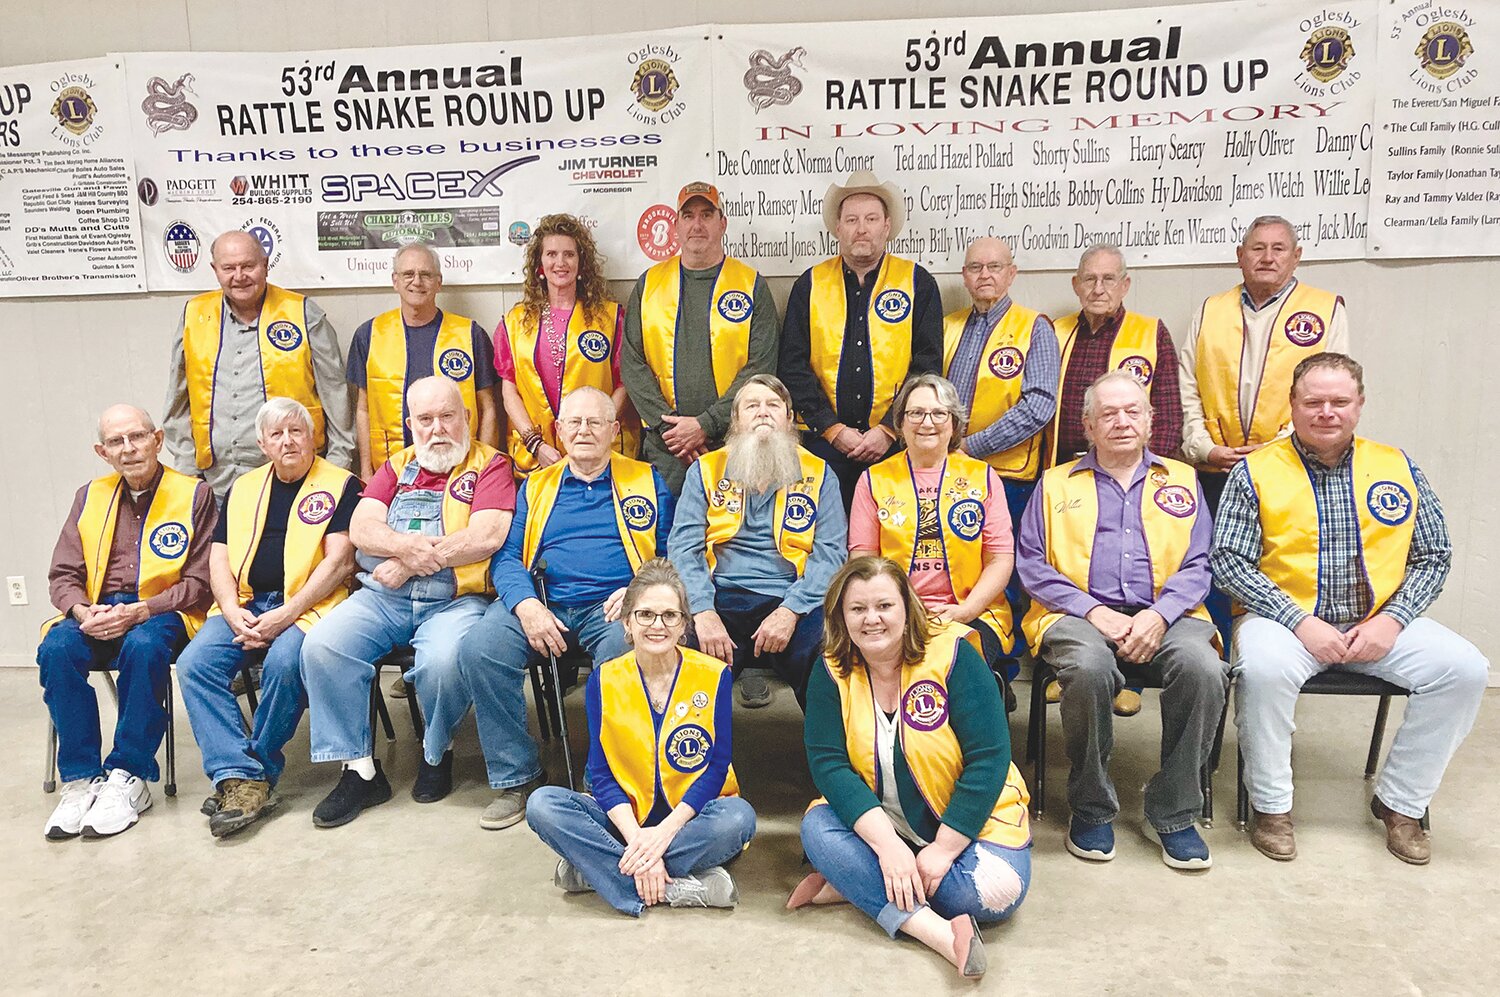 Pictured are the members of the Oglesby Lions Club who host the Rattlesnake Roundup event each year. The officers include President Ryan Basham, Vice President Willie Smith, Secretary Nancy Kepple, and Treasurer Ted Tatum.